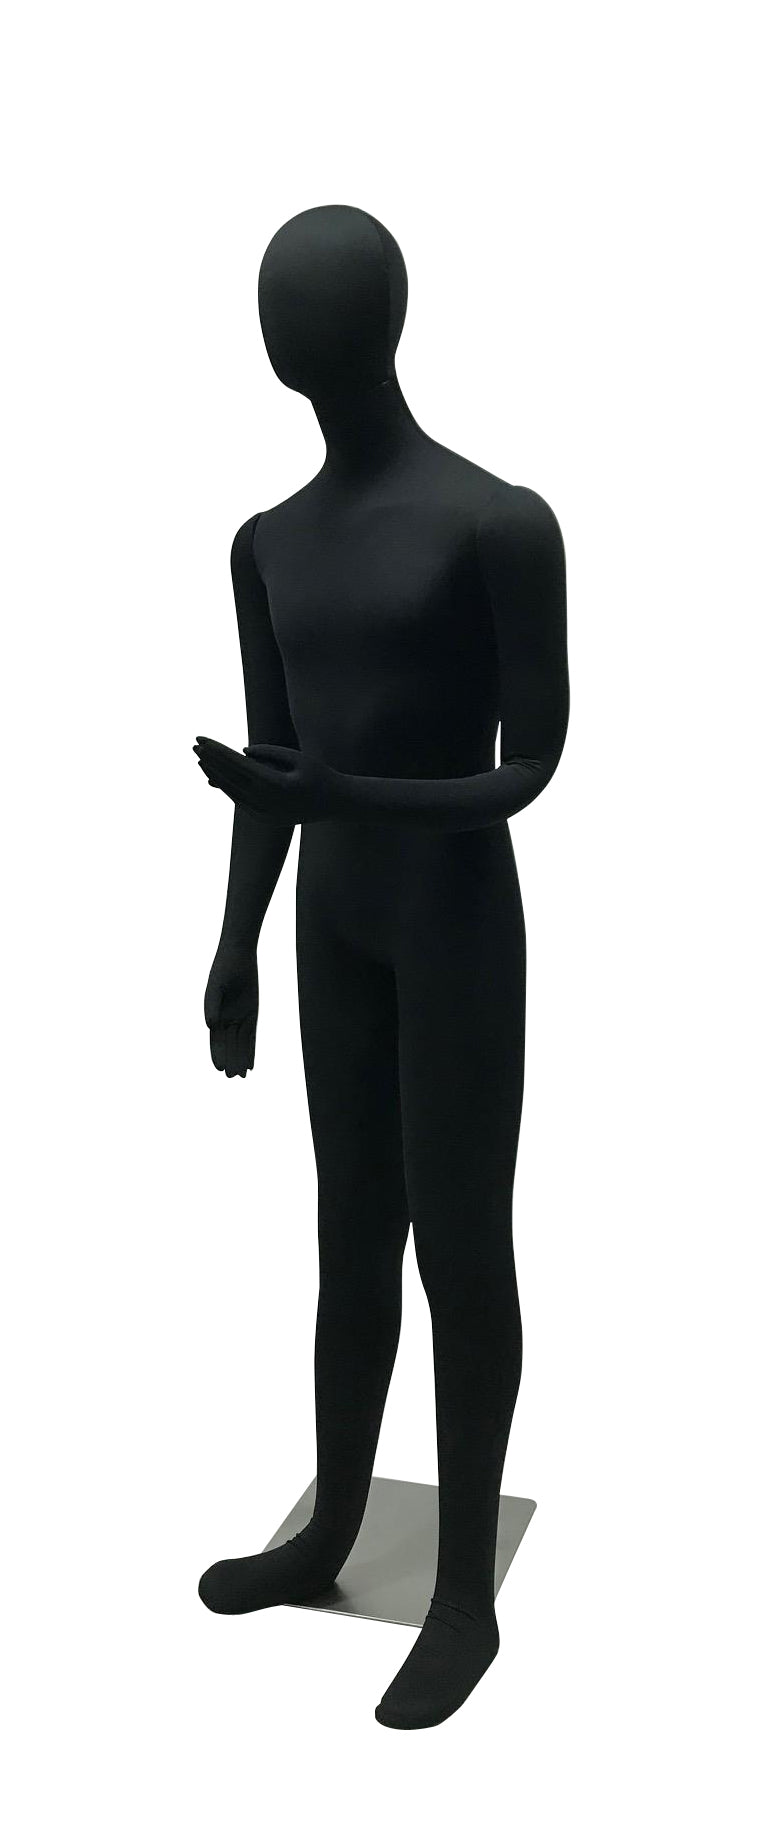 Black Cloth Egghead Male Mannequin: Bendable with Removable Head